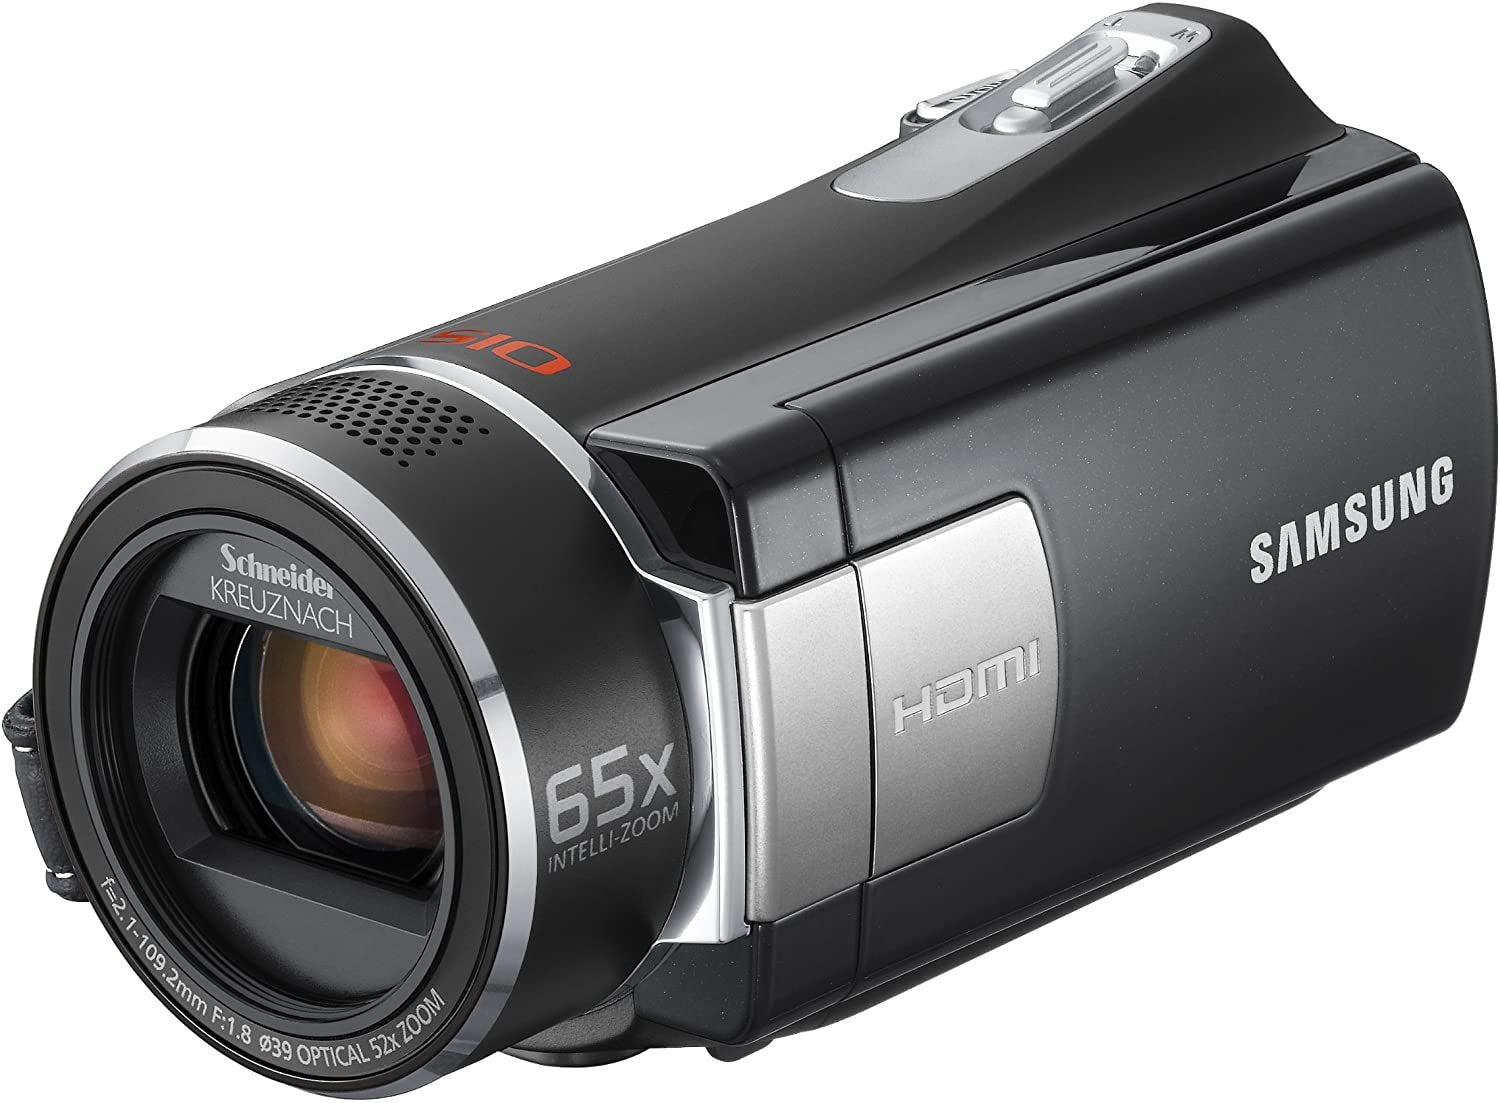 Samsung SMX-K40 Up-scaling HDMI Camcorder w/52x Optical Zoom